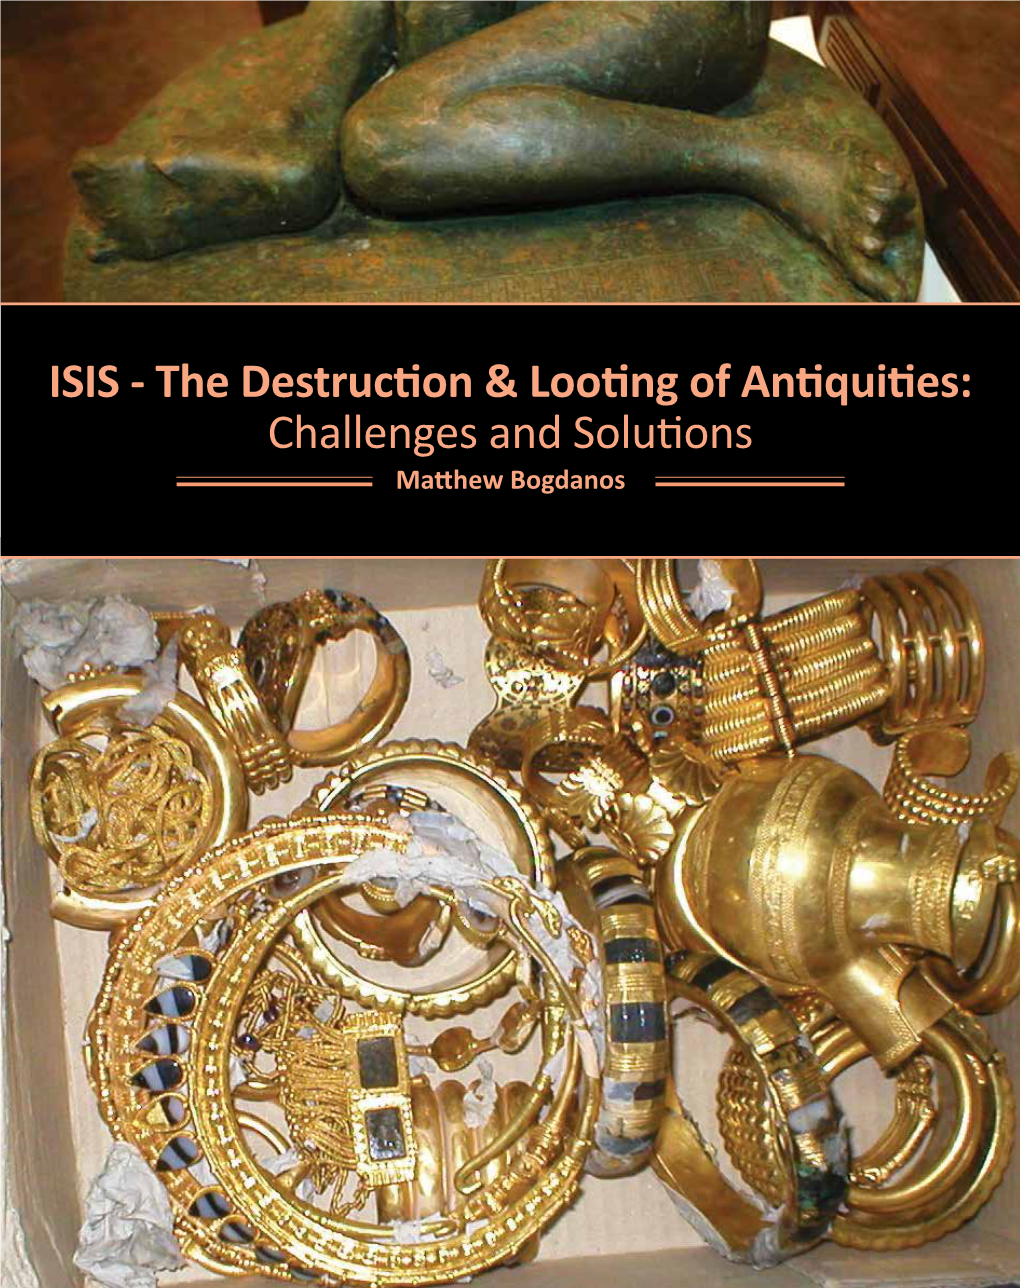 ISIS - the Destruction & Looting of Antiquities: Challenges and Solutions Matthew Bogdanos ISIS - the Destruction & Looting of Antiquities: Challenges and Solu